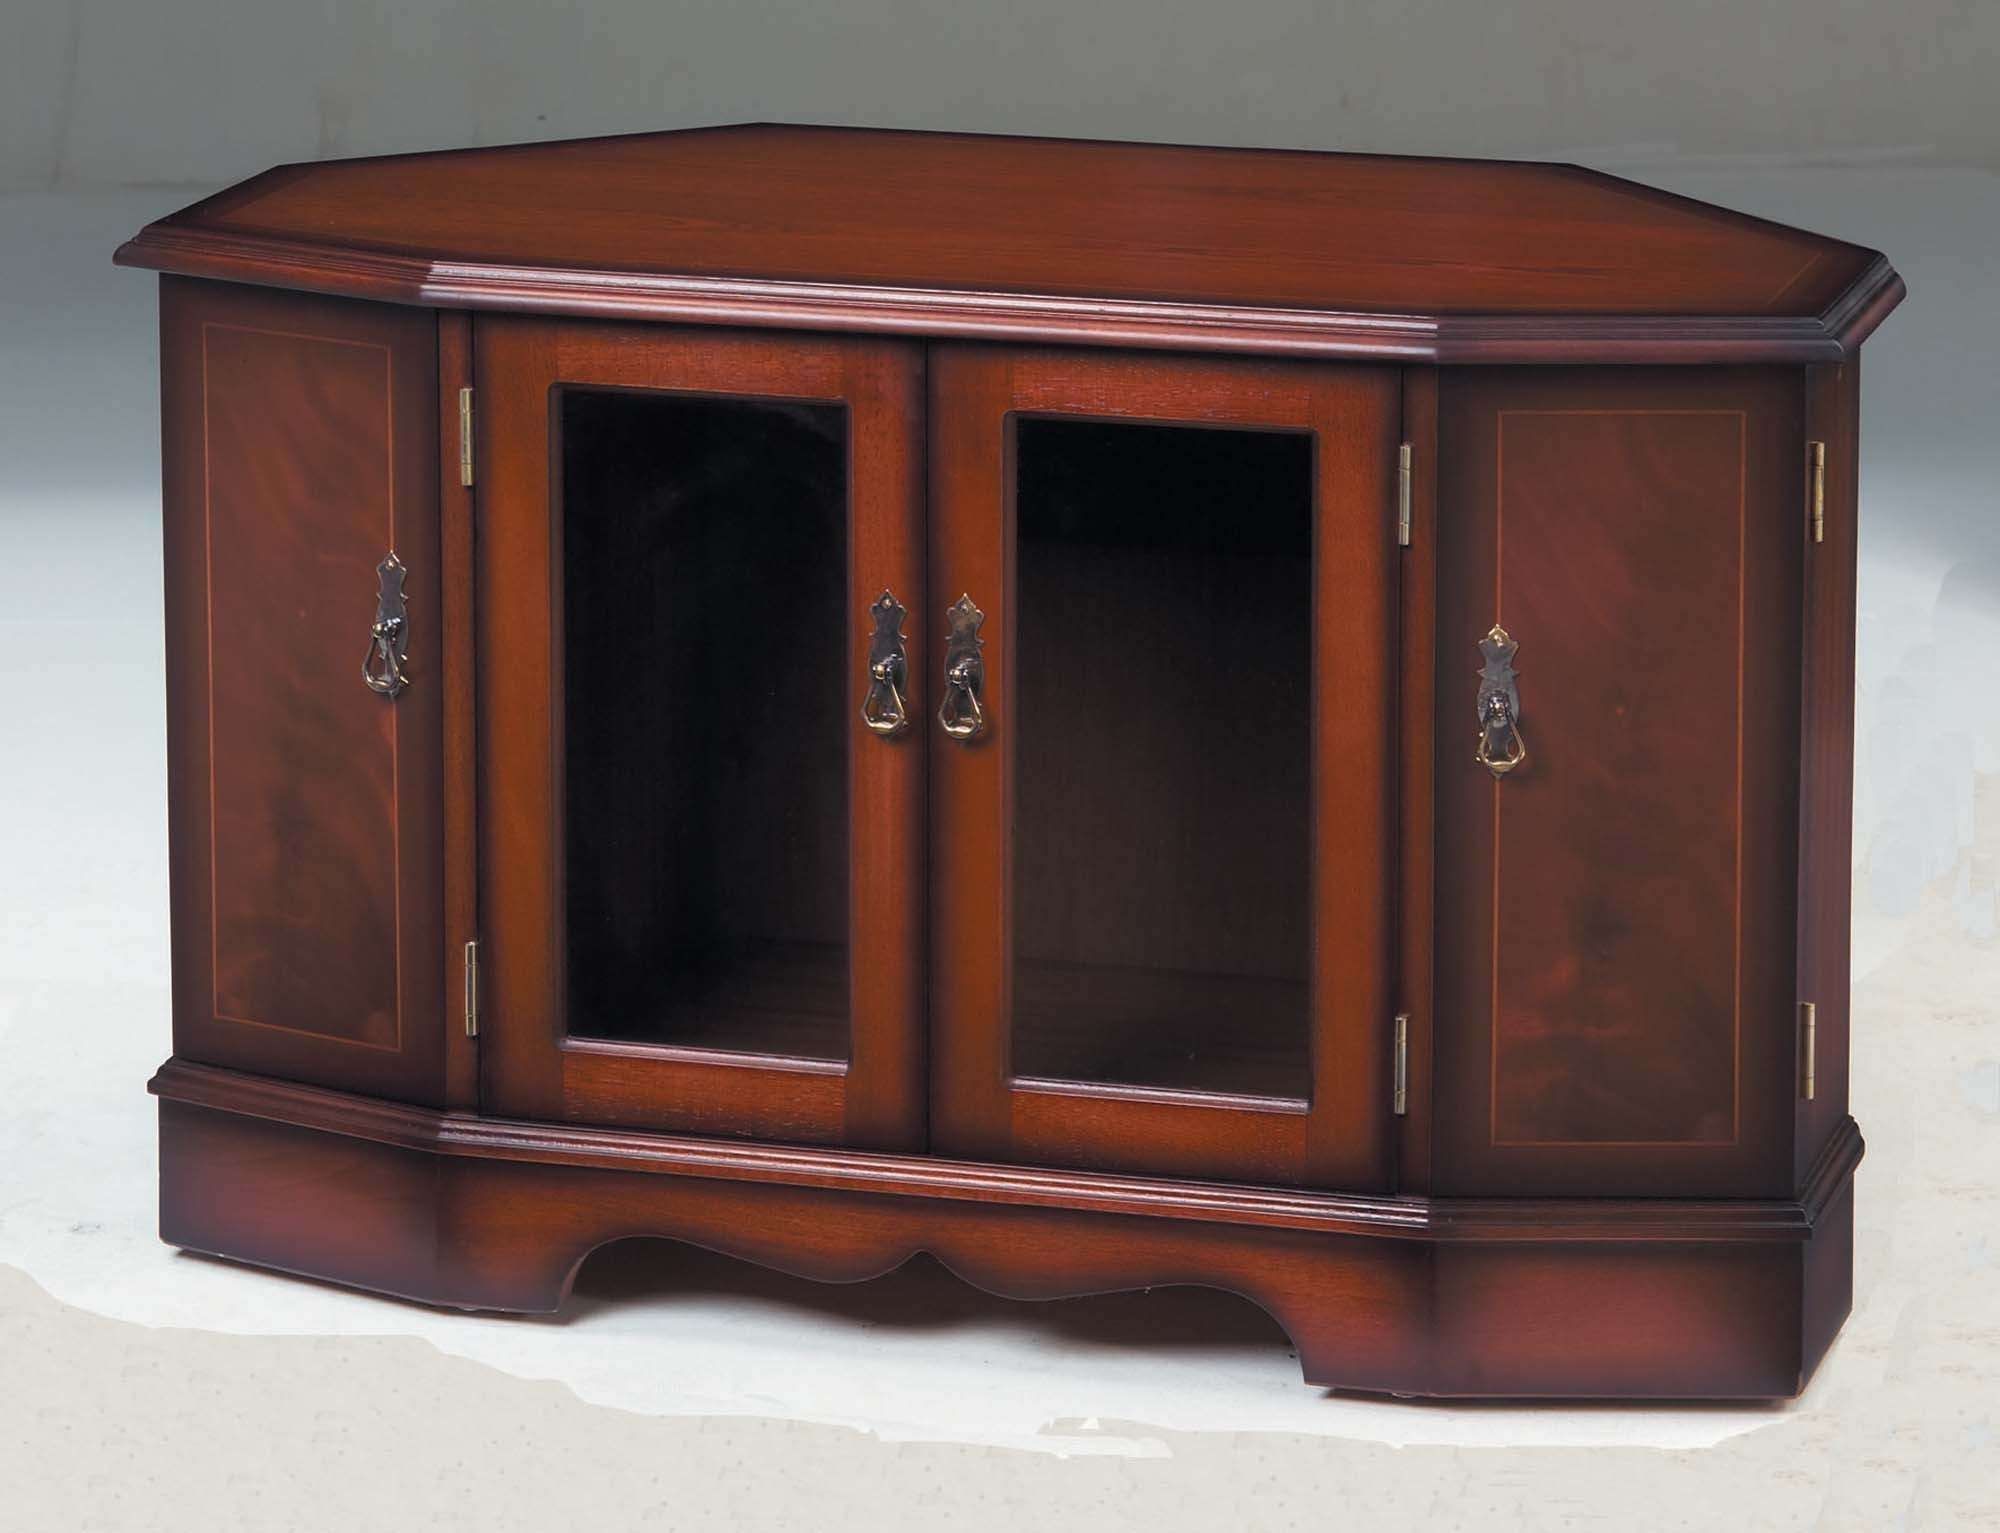 Strongbow Mahogany 1037 Corner Tv Cabinet | Tr Hayes – Furniture In Mahogany Tv Cabinets (View 1 of 20)